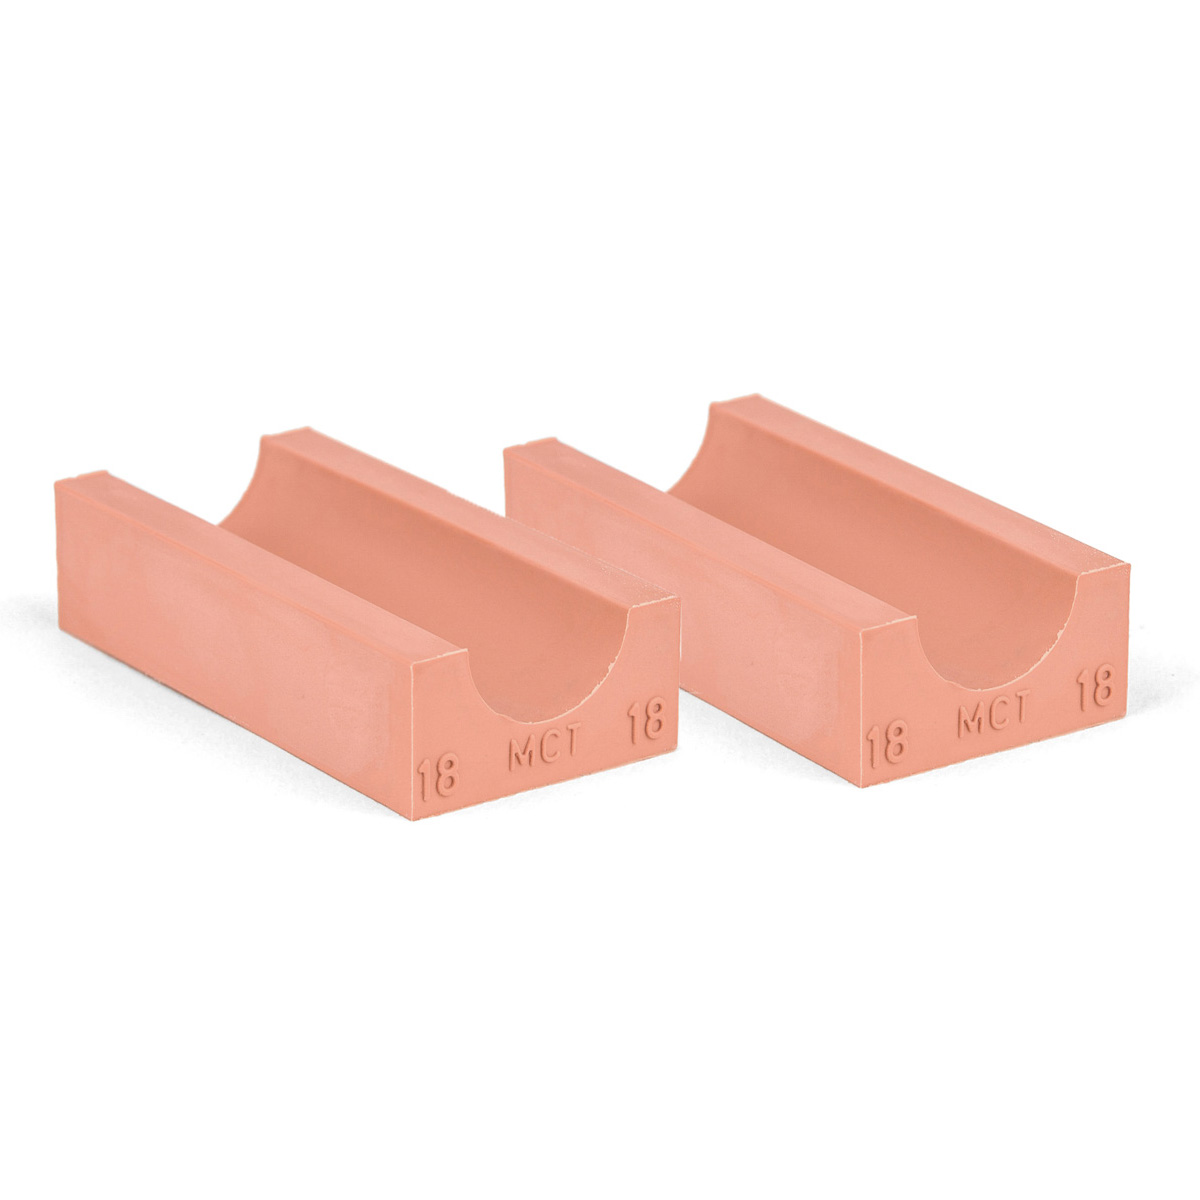 30-18*2 Set of 2 half insert block lycron 30mm, 30-18 for cable/pipe diam. 17.5-18.5mm